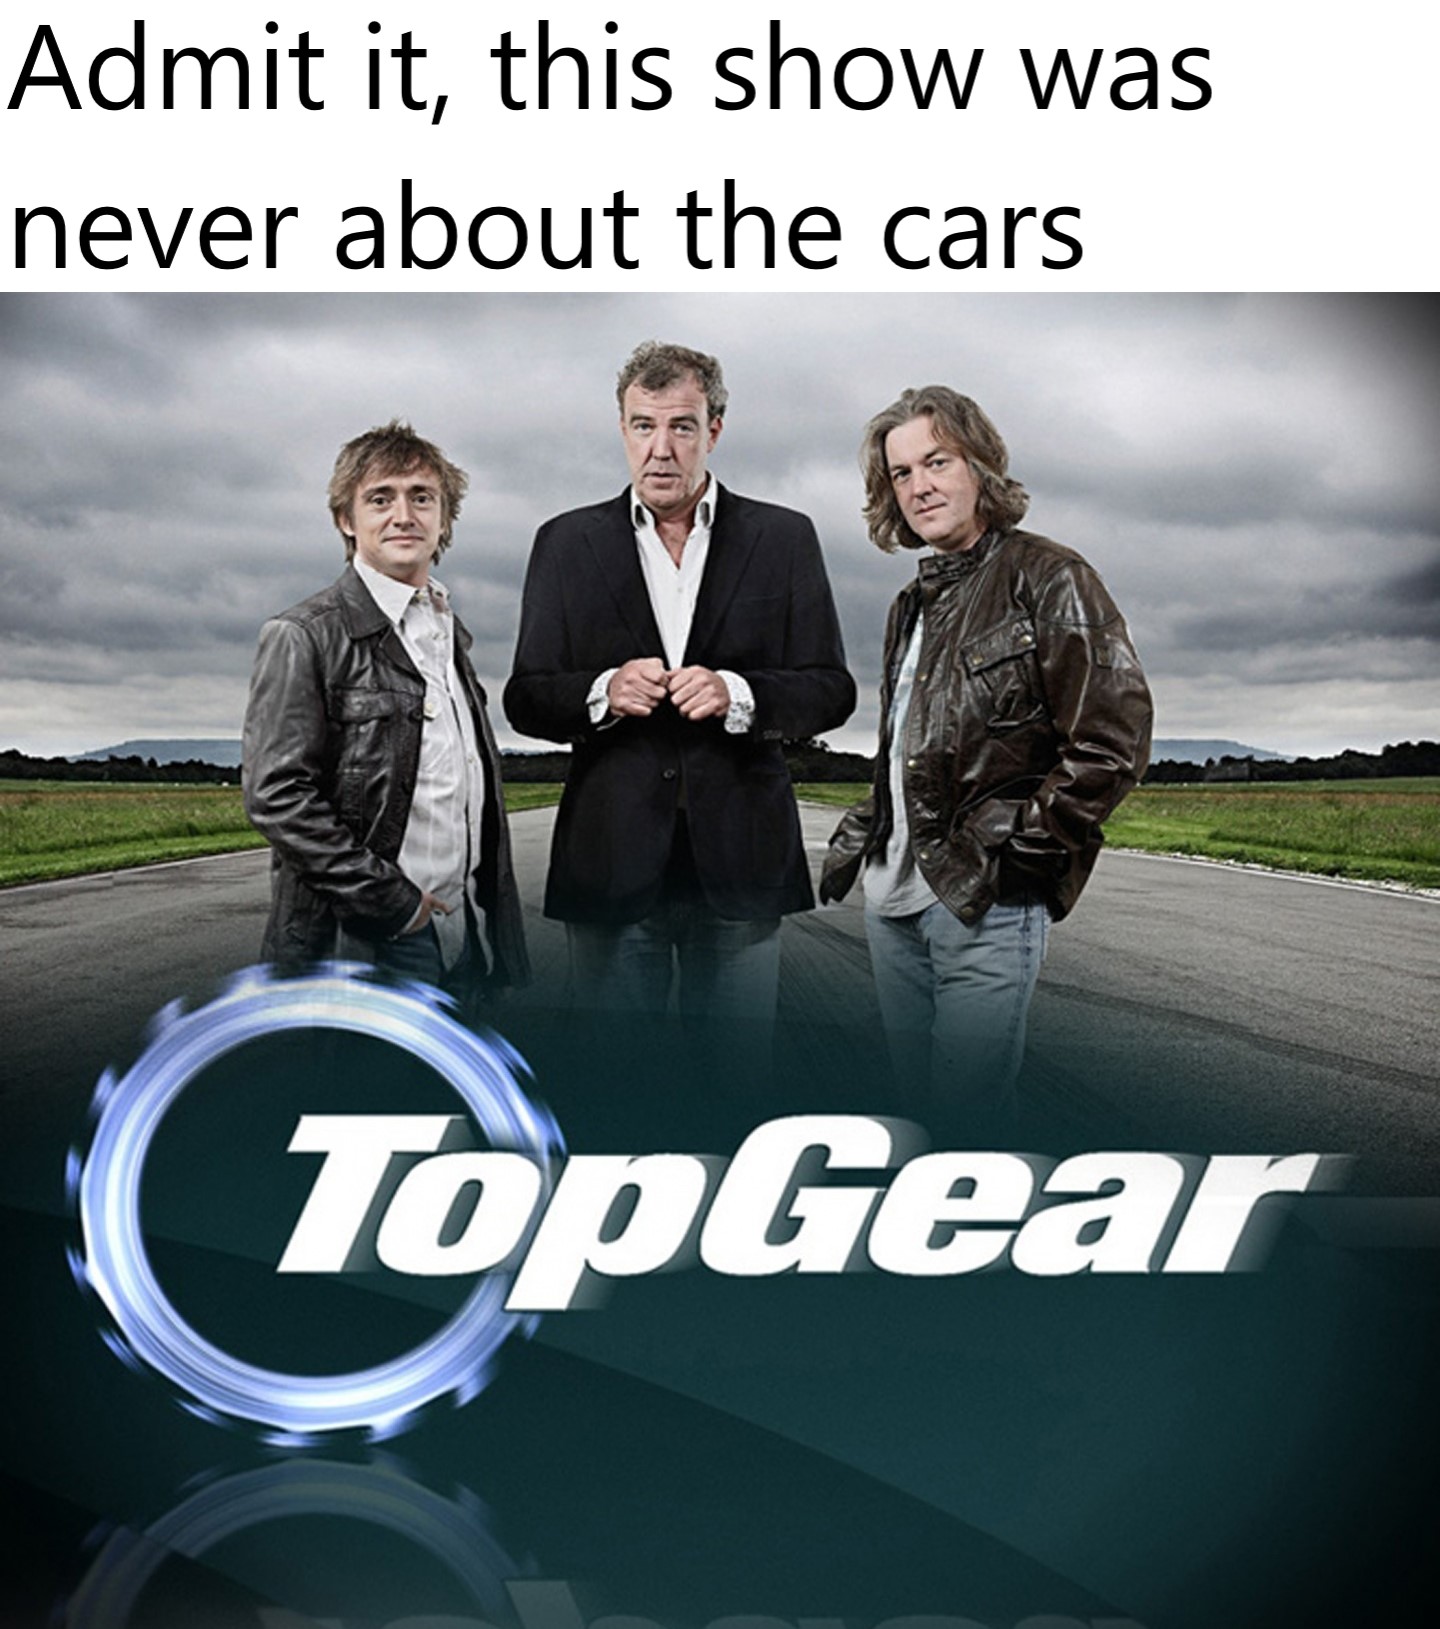 dank memes - funny memes - top gear - Admit it, this show was never about the cars TopGear